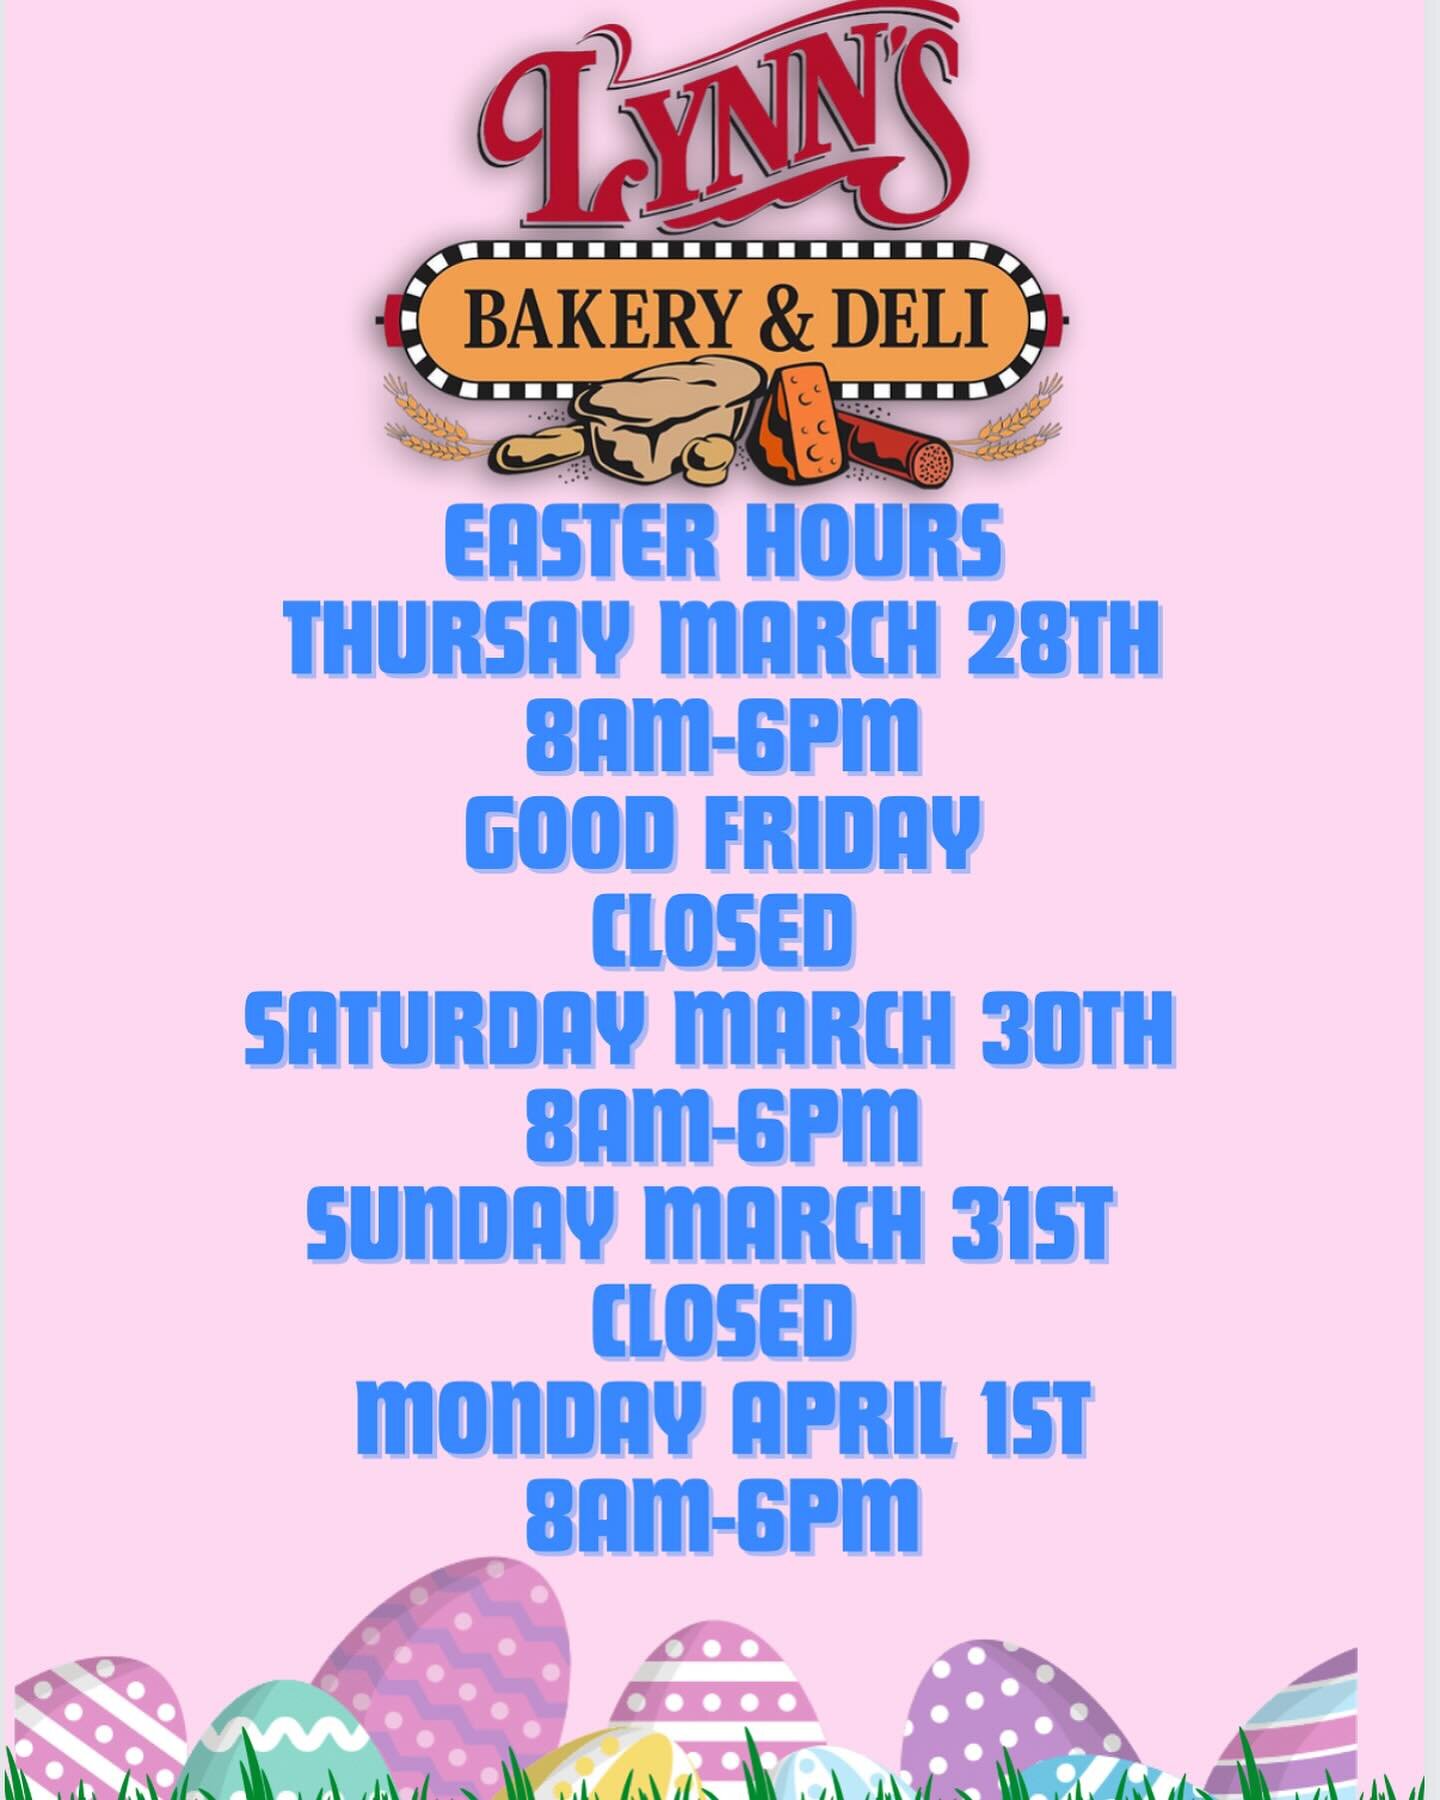 Here are our Easter weekend hours. We will be closed Good Friday and Easter Sunday. We would like to wish everyone a safe and hoppy Easter weekend. See you soon!